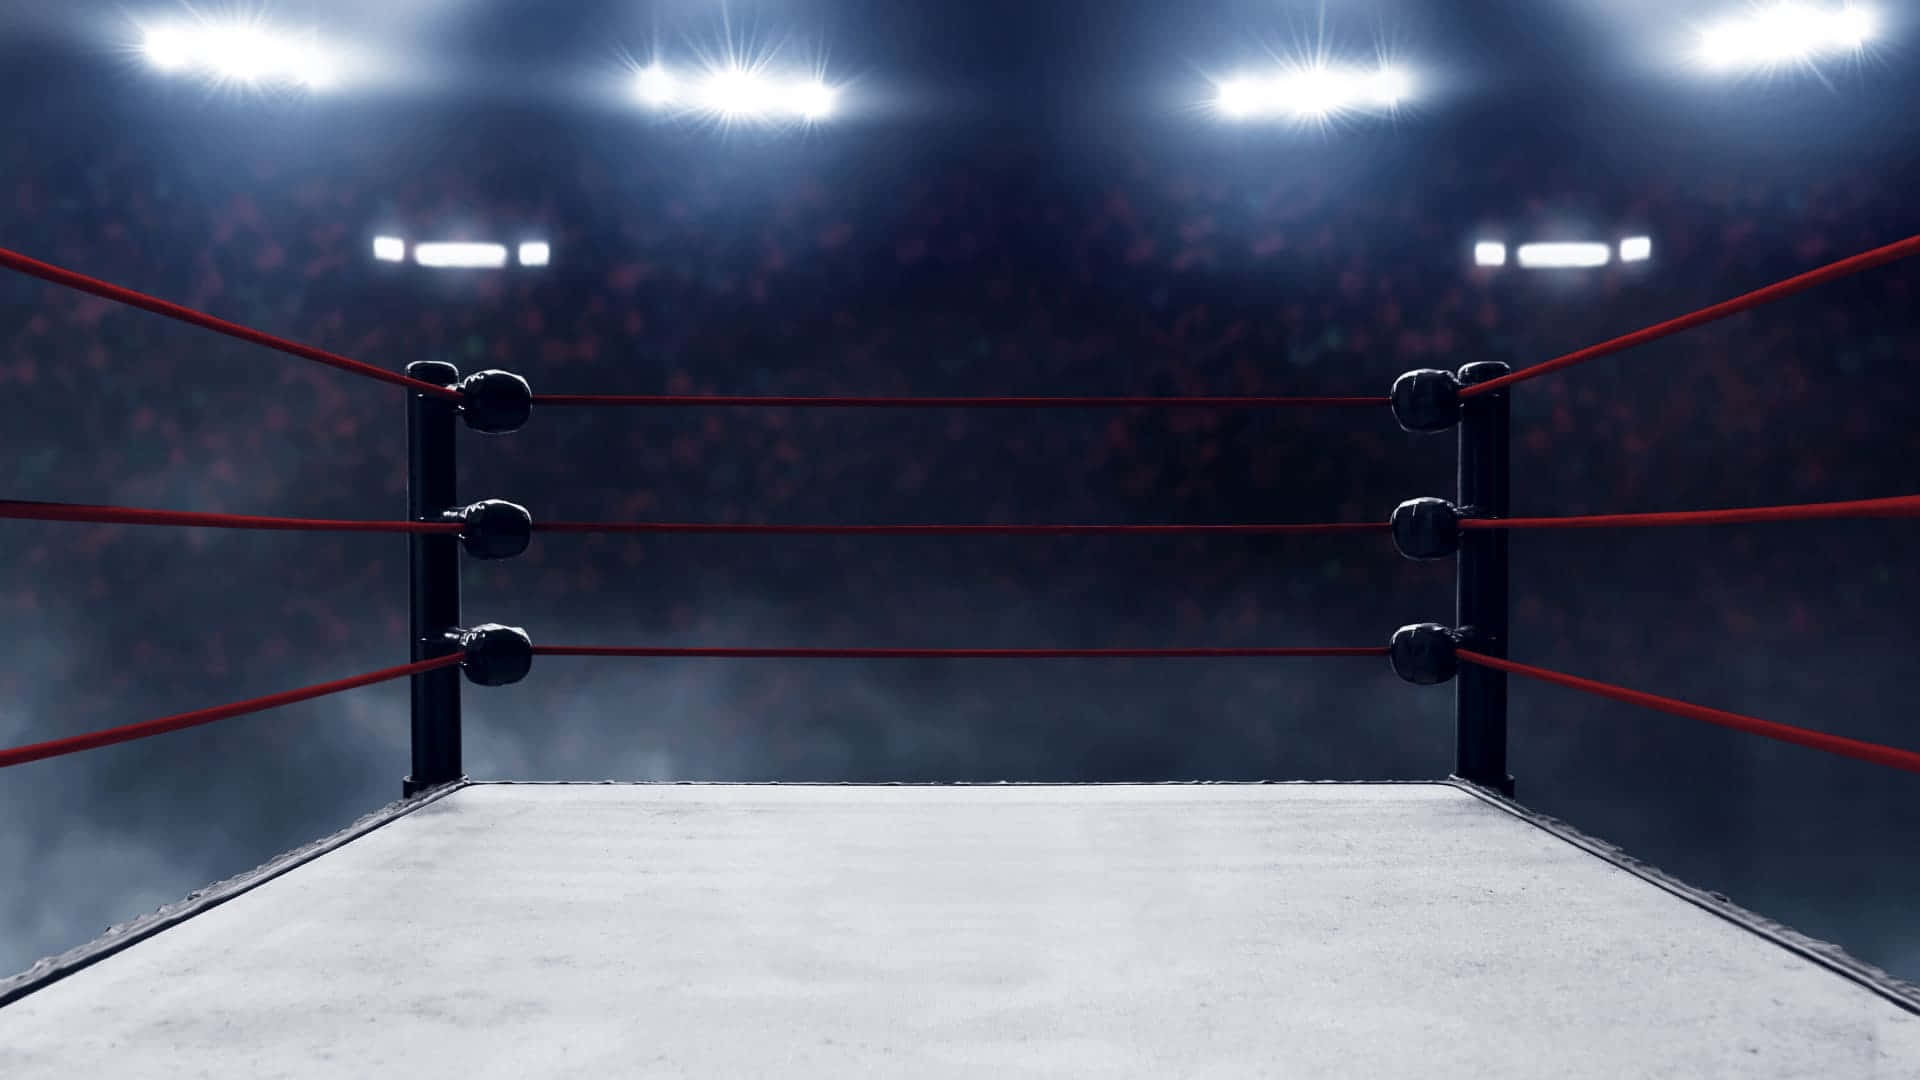 Image  A Professional Wrestling Ring Under the Spotlights